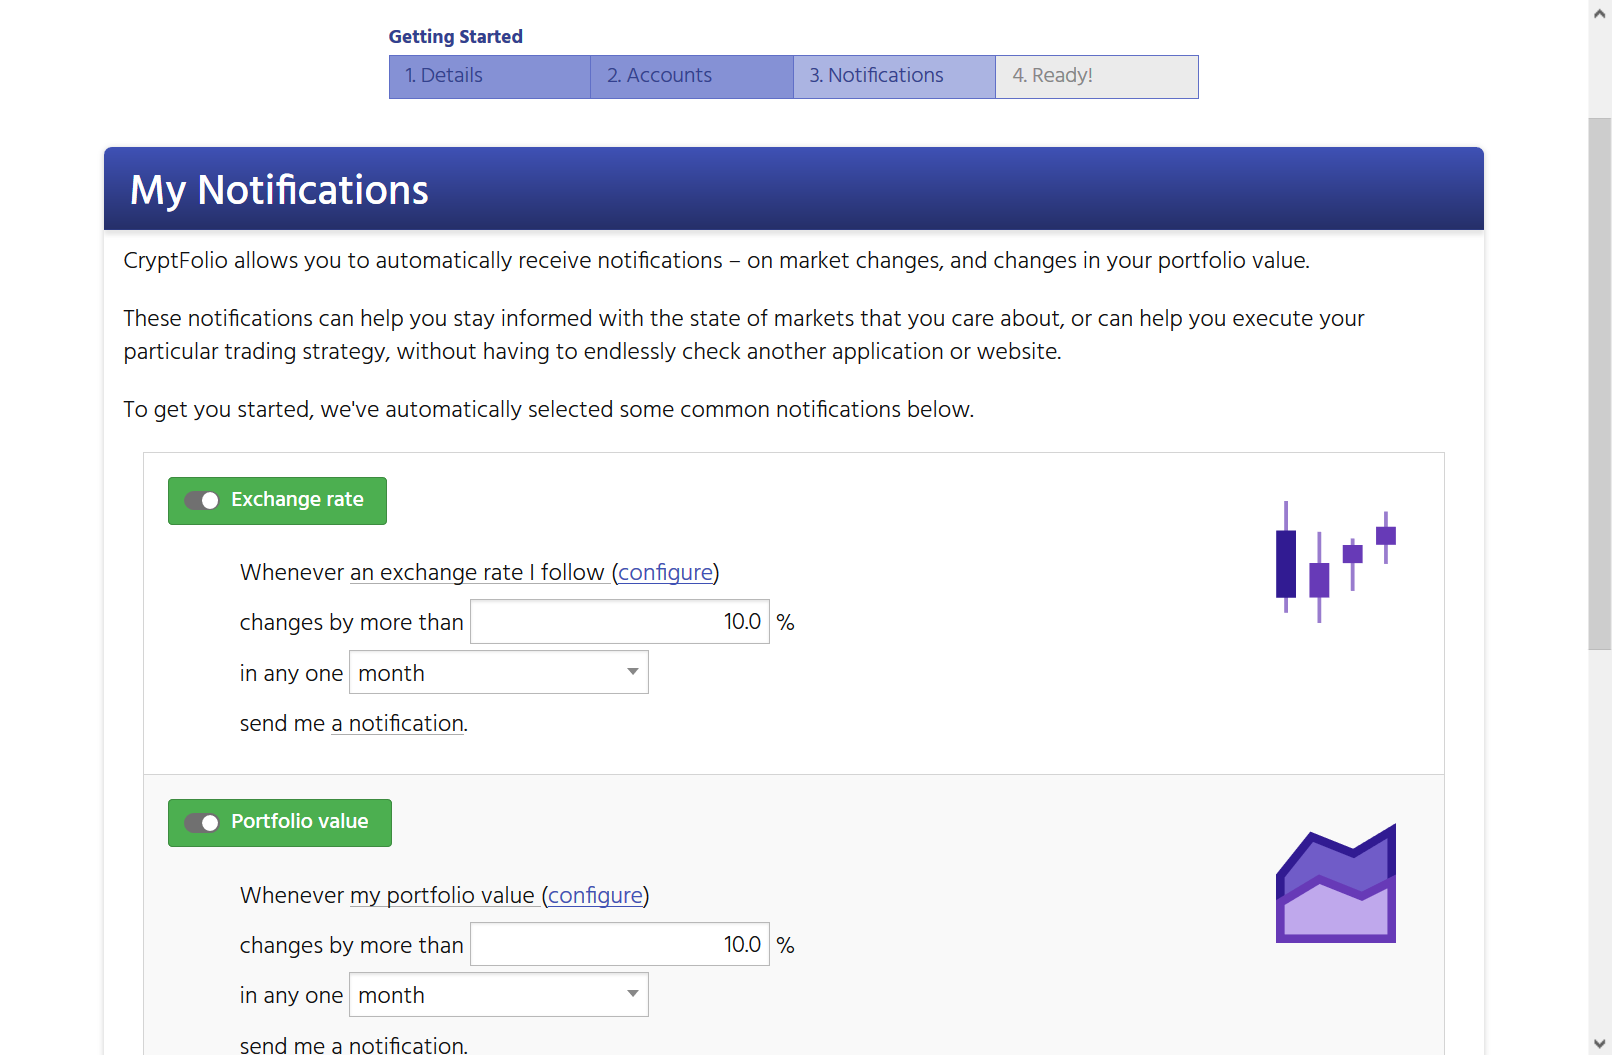 Screenshot showing the CryptFolio wizard interface to set up notifications on changes in exchange rates, and on changes in the value of a portfolio.